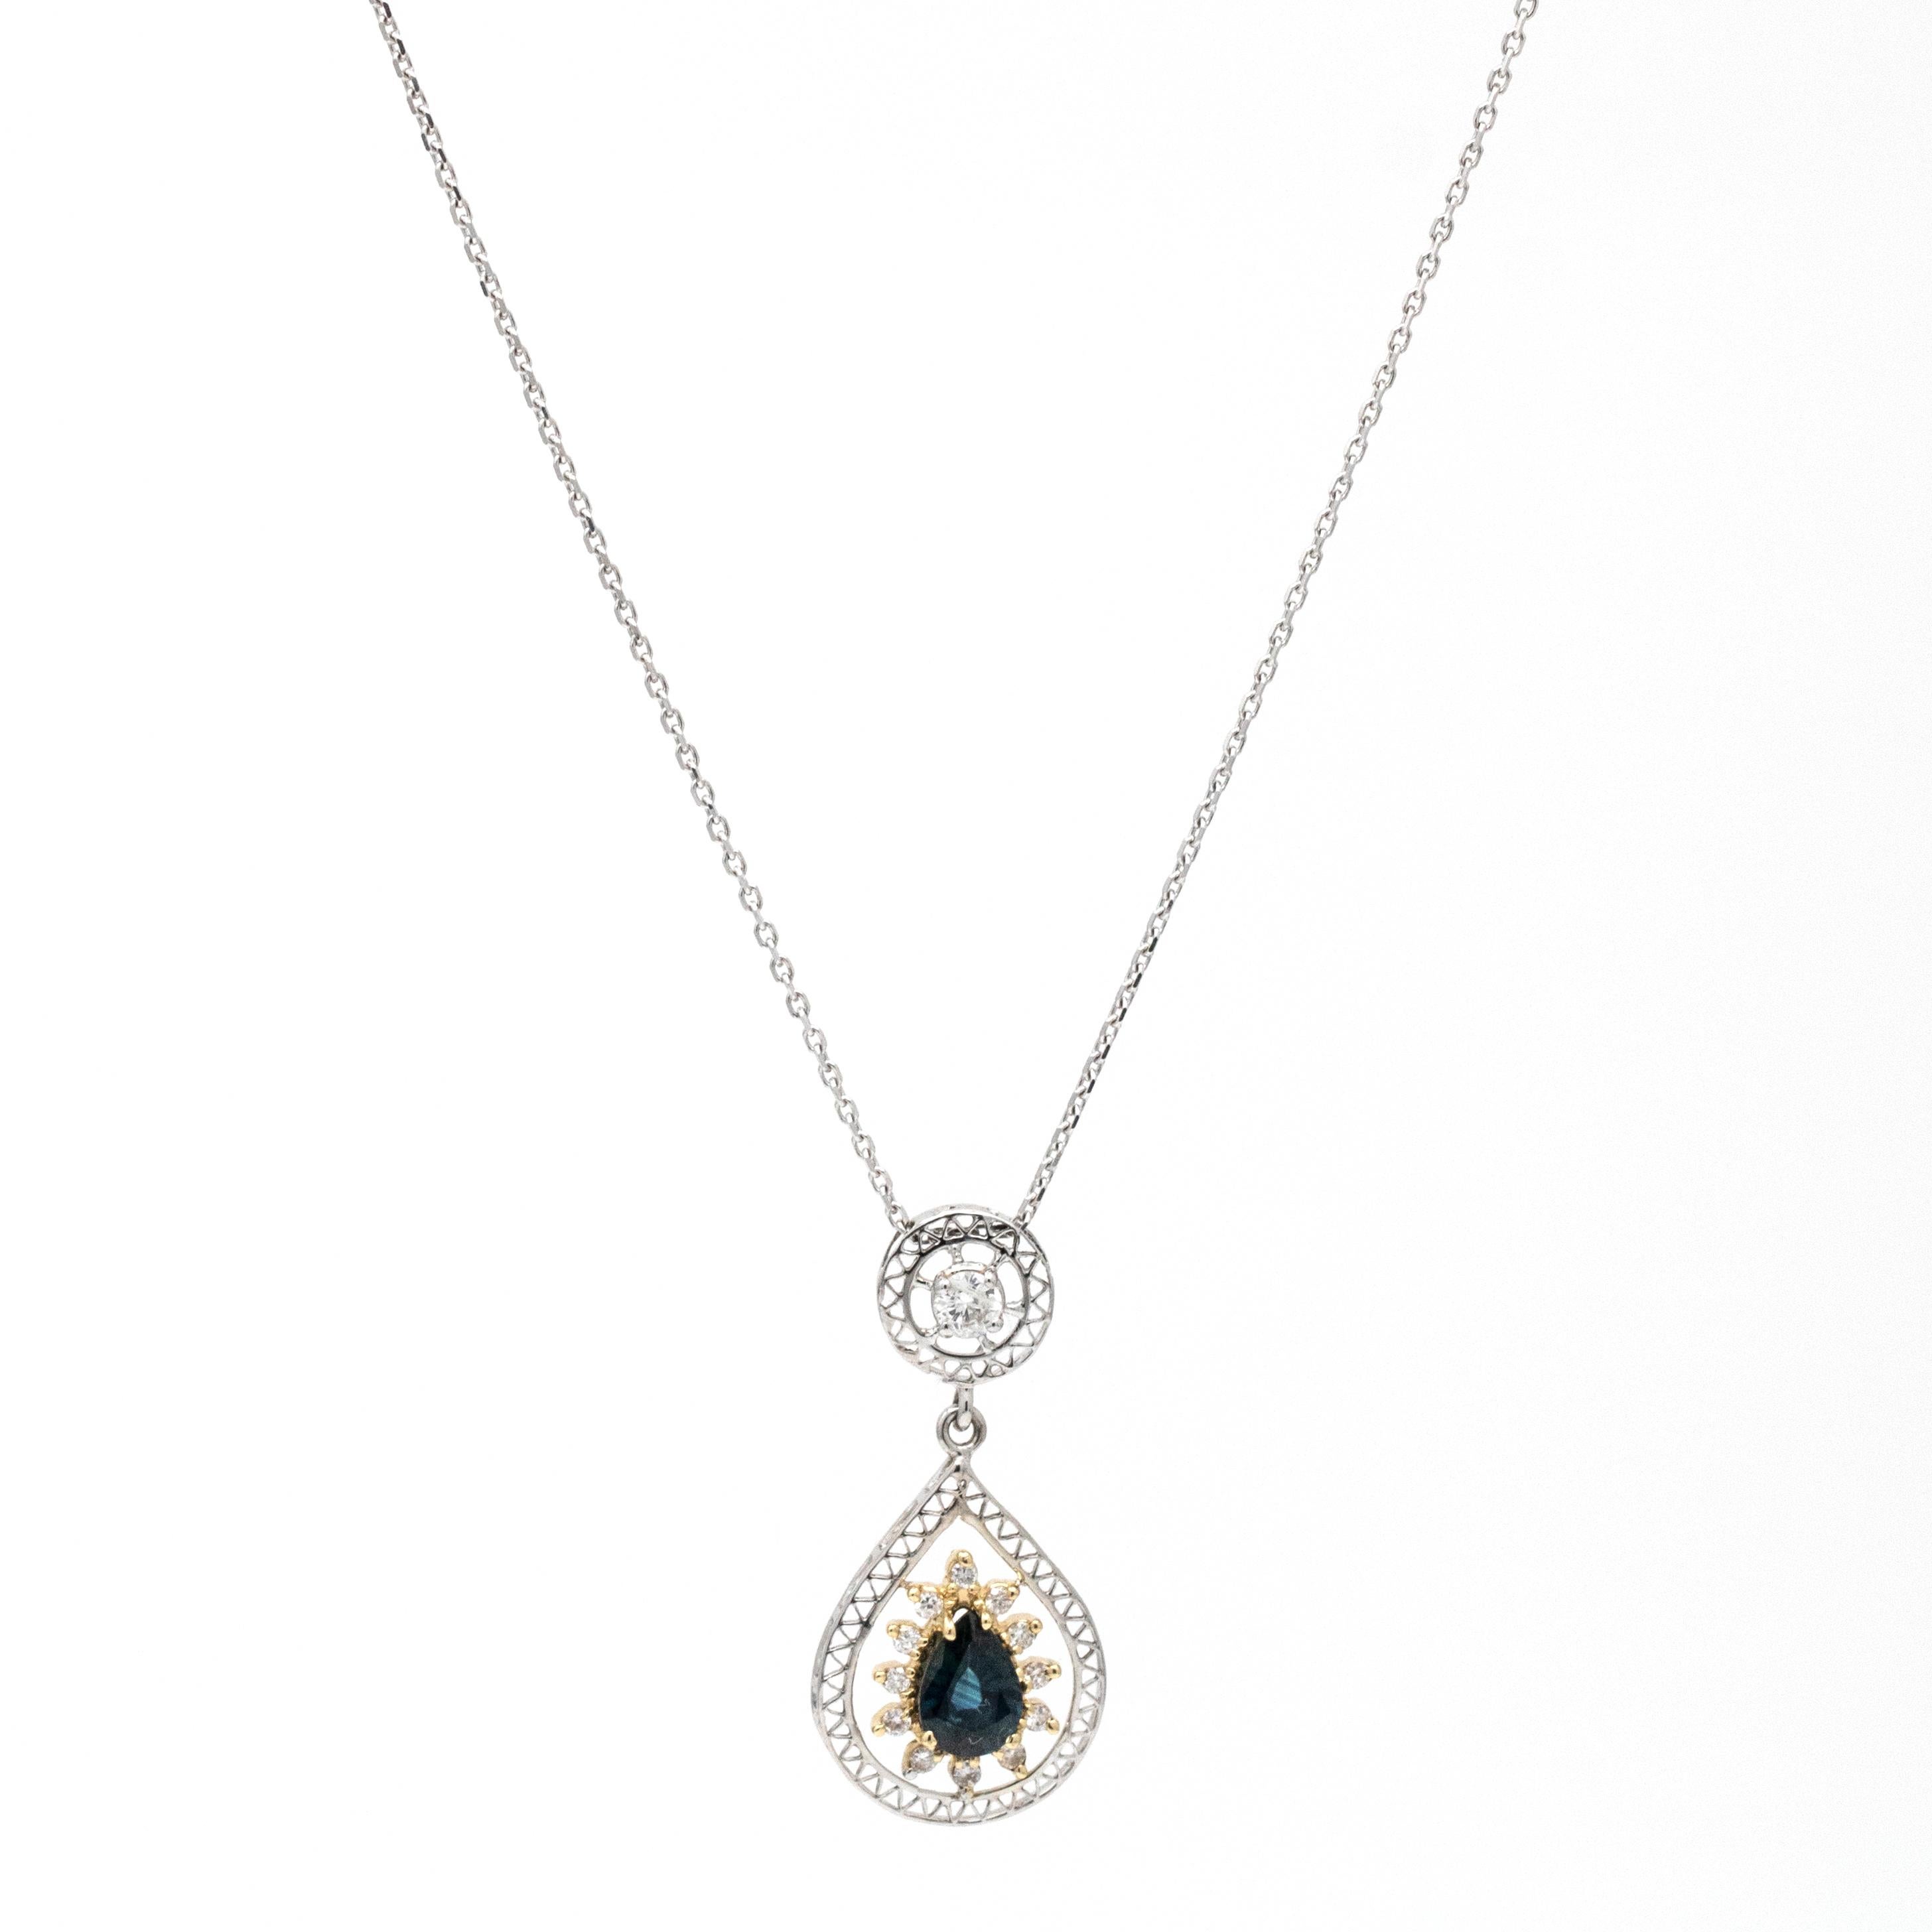 Handcrafted Women's Diamond and Blue Sapphire Dangle Pendant Necklace 14k Gold In Excellent Condition For Sale In Boca Raton, FL